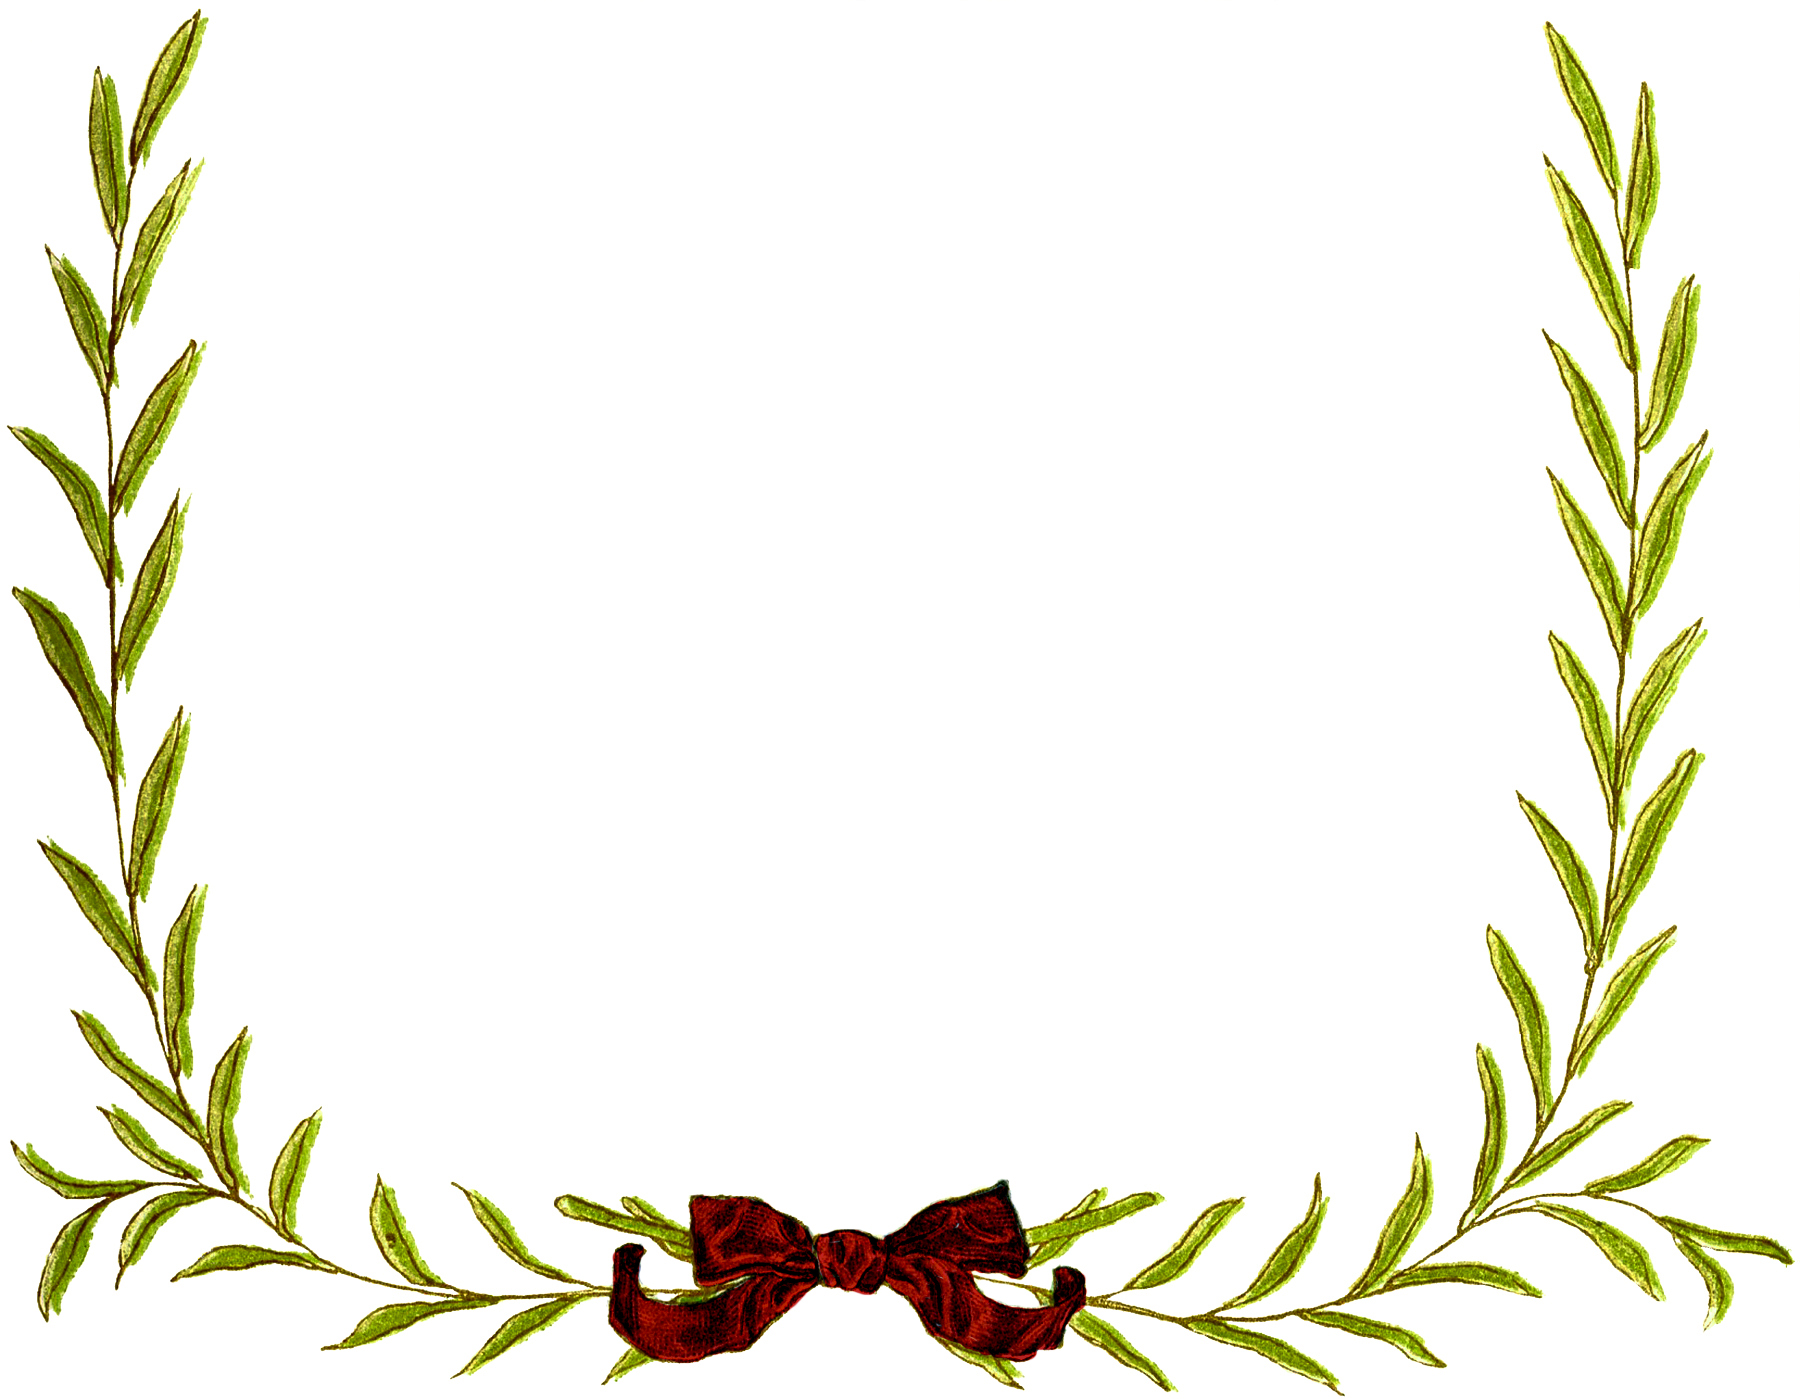 Simple Christmas Wreath Frame Images   The Graphics Fairy